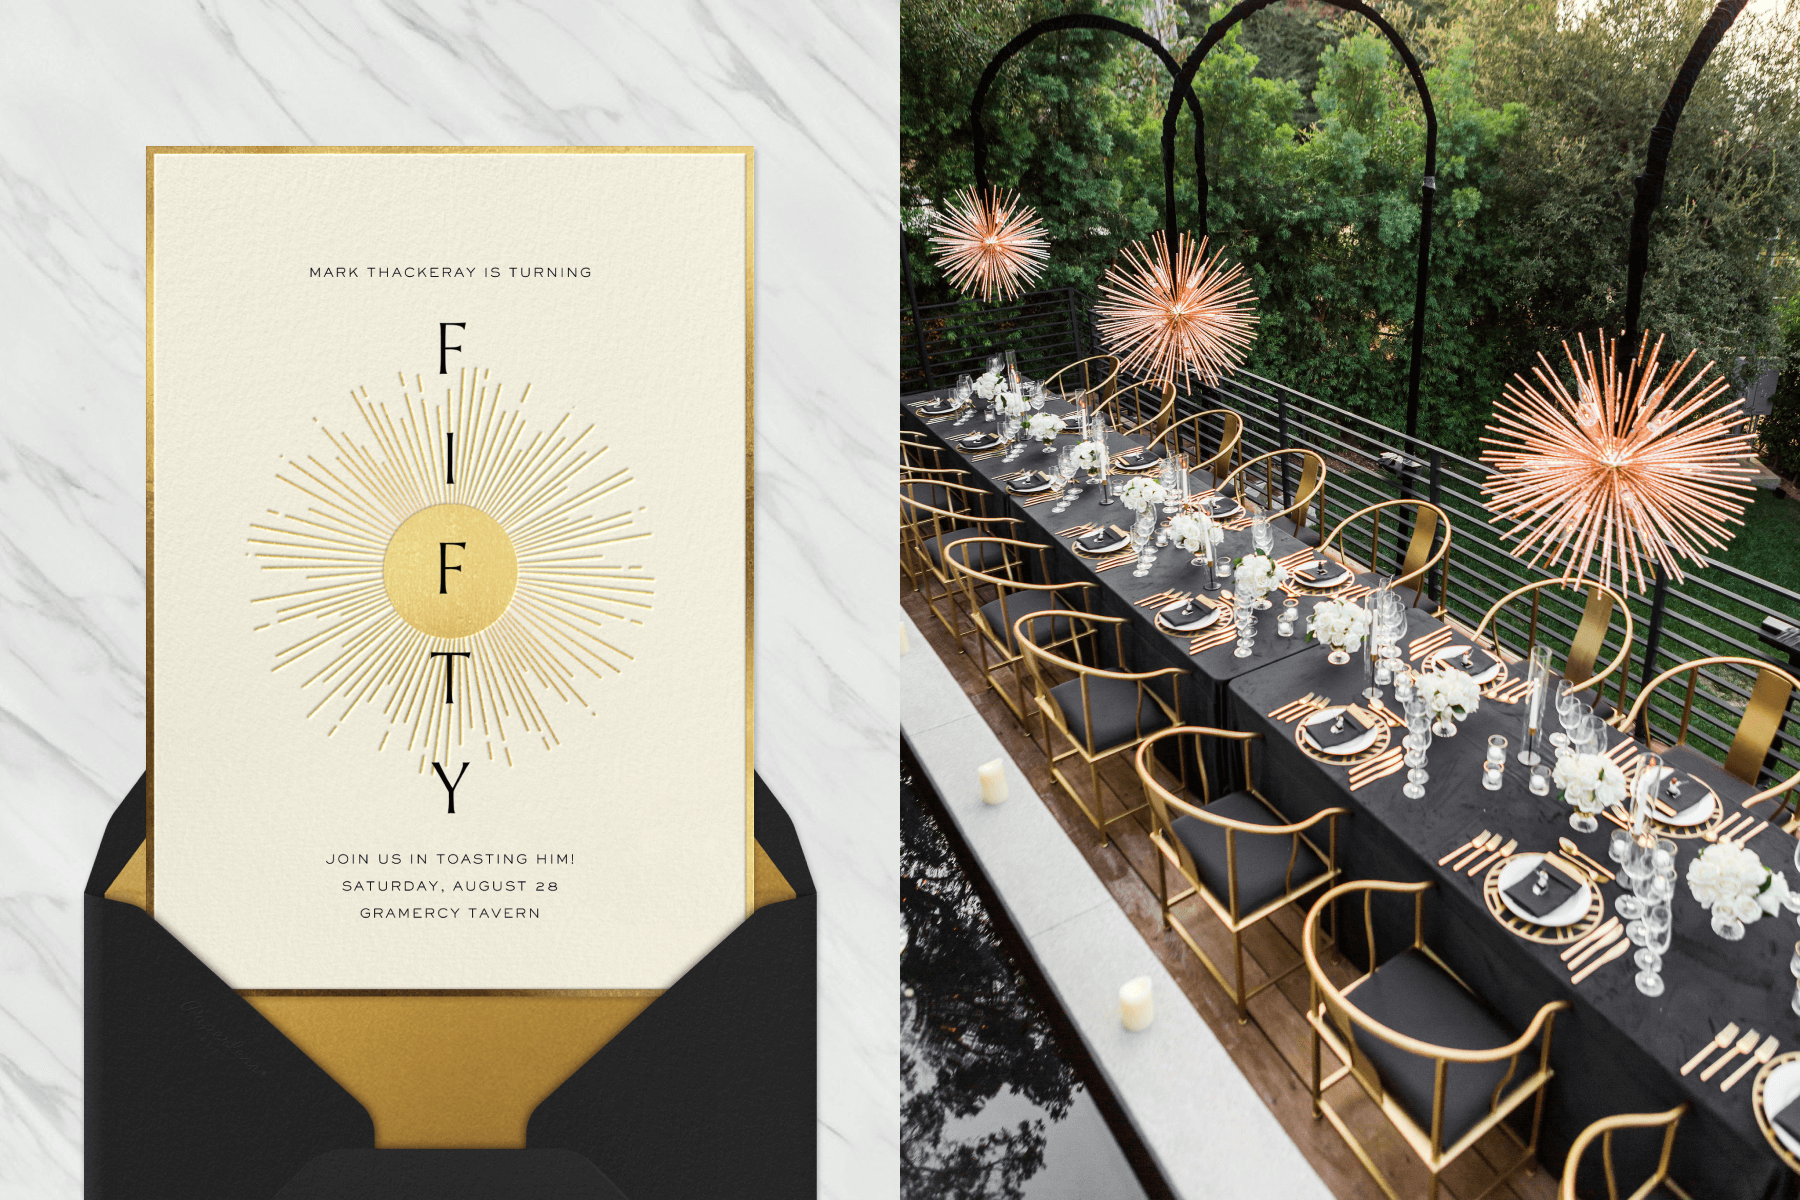 Left: A fiftieth birthday party invitation with a thin gold border and a sunburst in the center with a black envelope and gold liner. Right: A black banquet table near a pool with gold metal cushioned chairs has gold silverware and chargers and starburst-style lights hanging above.